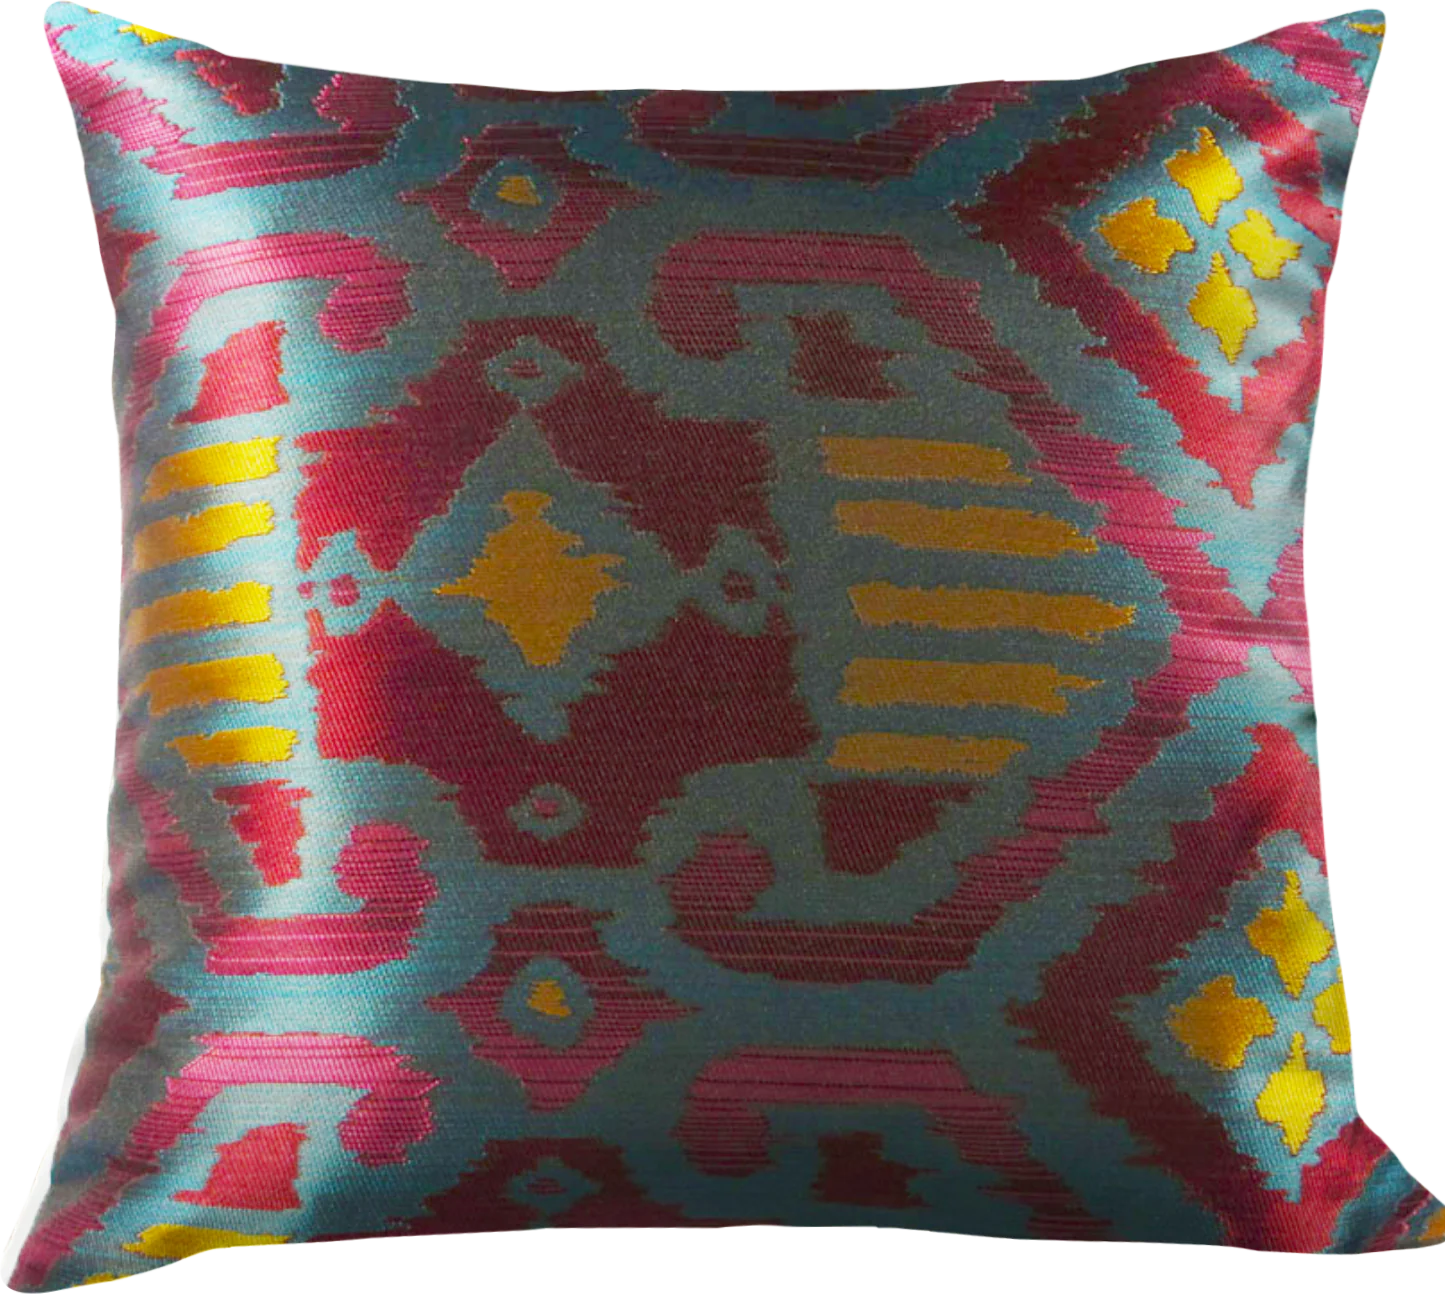 Eclectic Elegance Set | 3 Pillow Covers